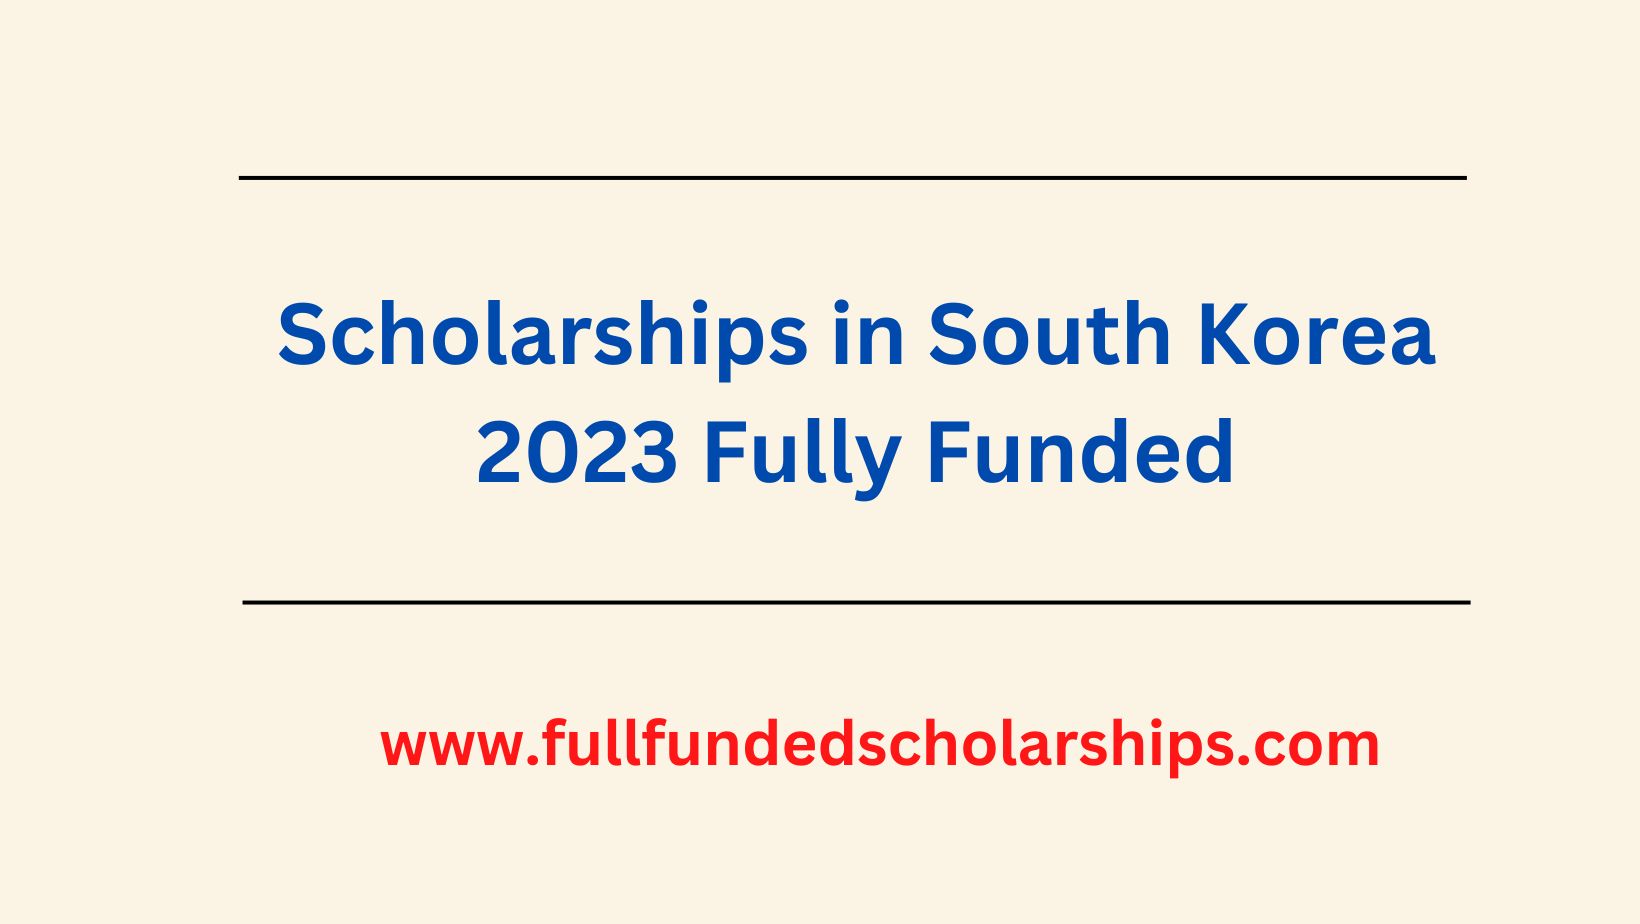 Scholarships in South Korea 2023 Fully Funded